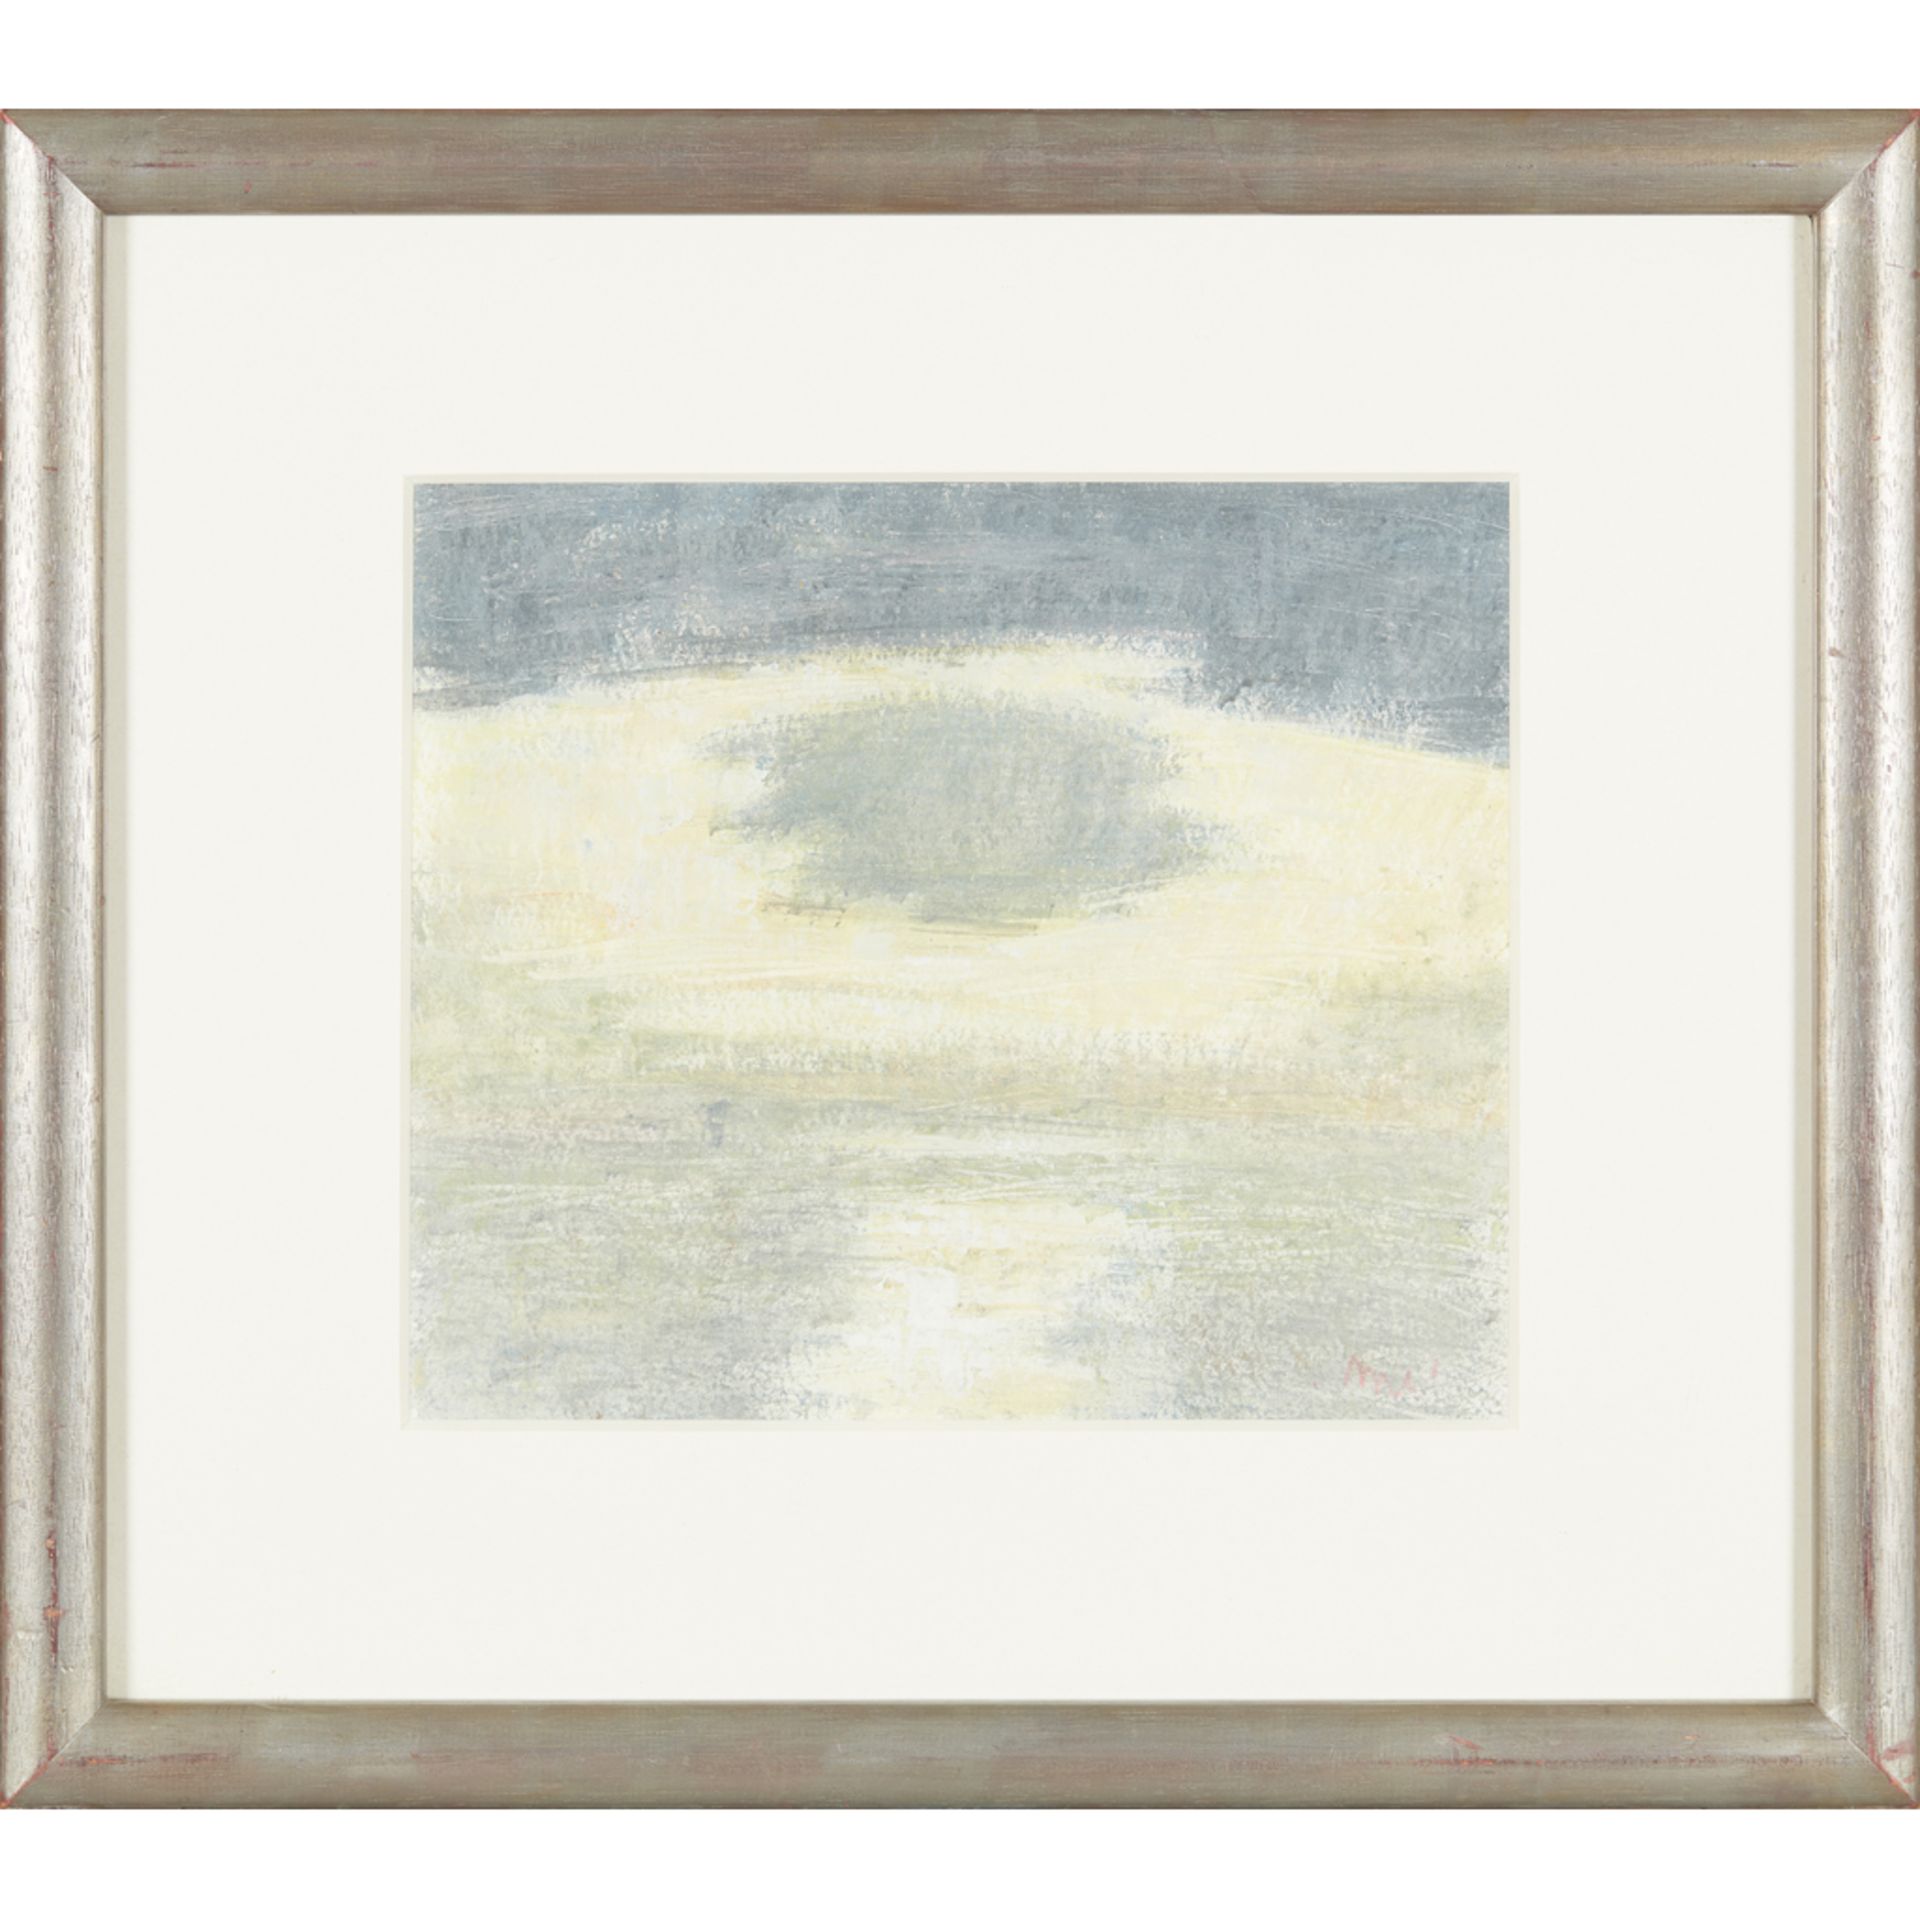 [§] GORDON BRYCE R.S.A., R.S.W. (SCOTTISH B.1943) NORTH SEA LIGHTS Signed, inscribed with title - Image 2 of 2